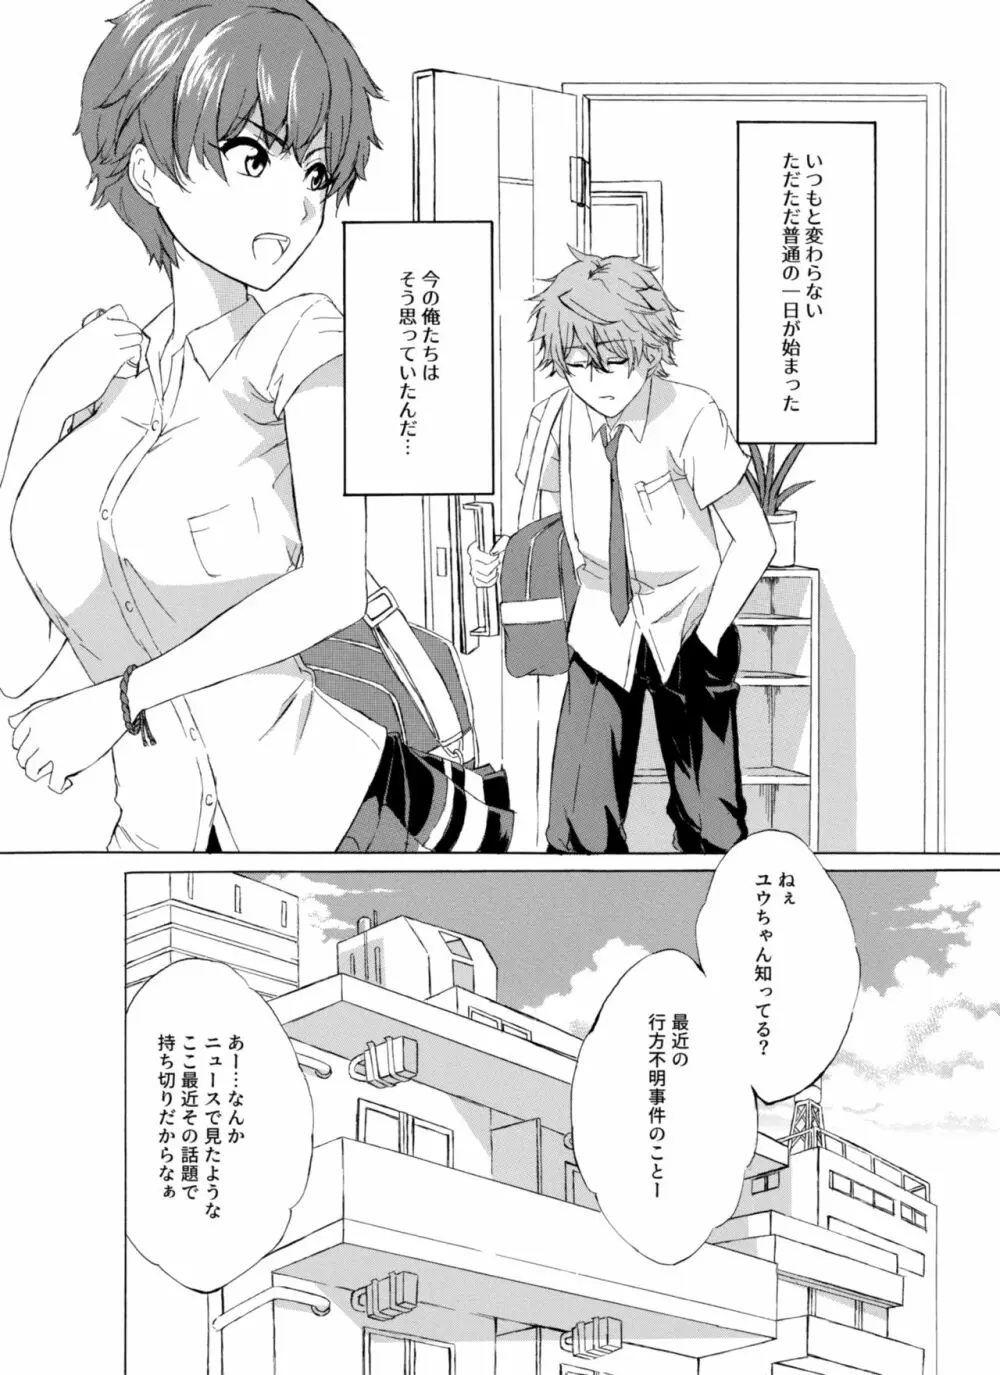 Alive or Explosion 第一話 「序章」 Page.9